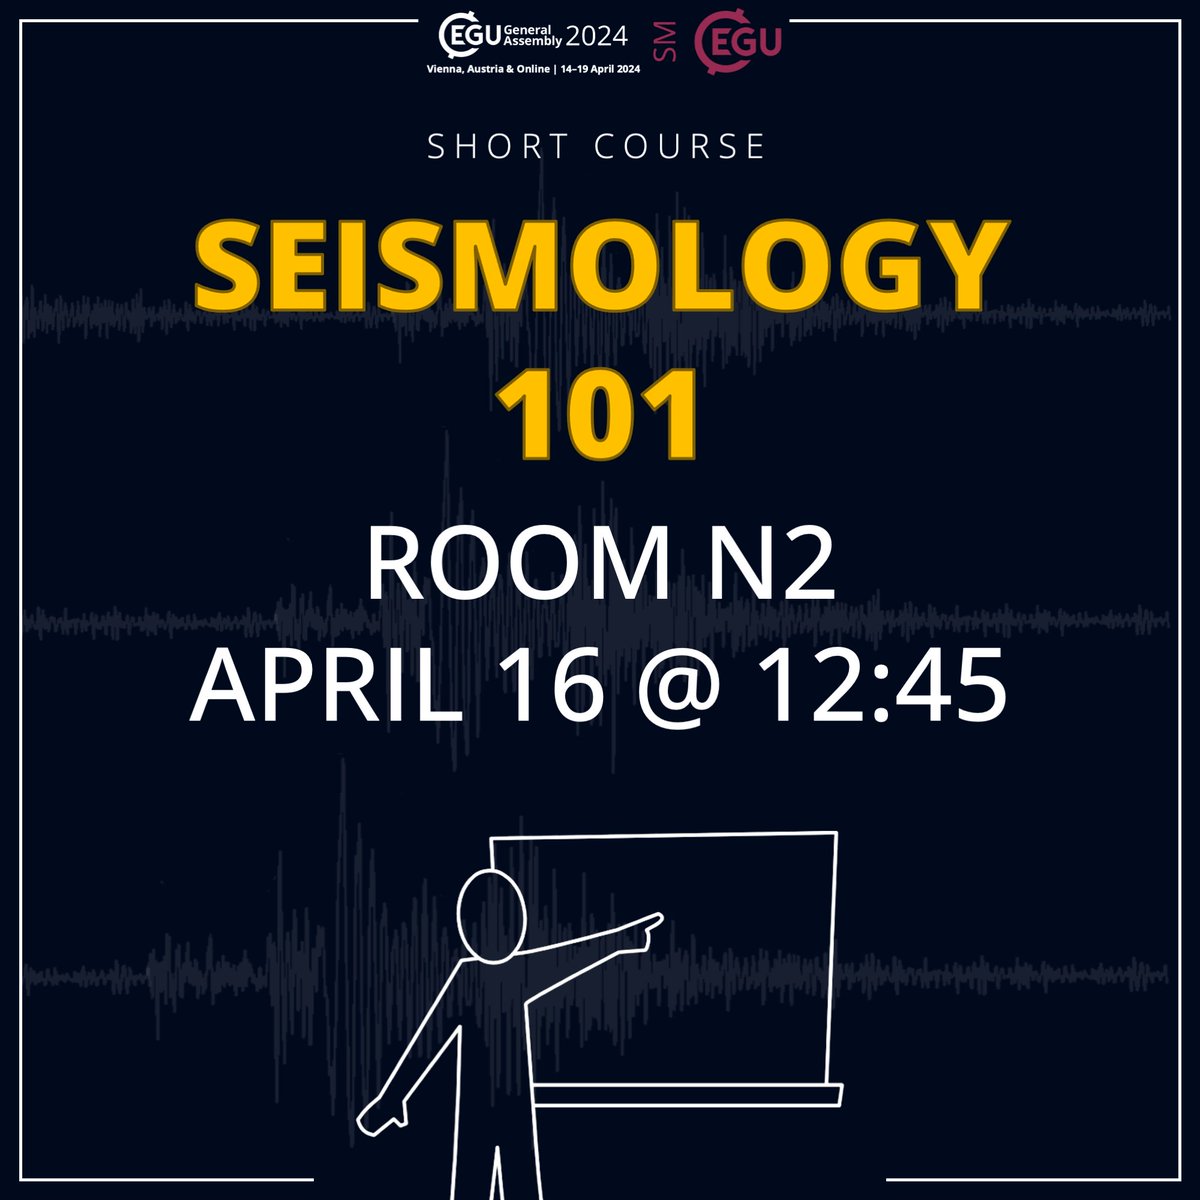 New to seismology or need to refresh your knowledge of #seismology? Join our Seismology 101 short course on Tuesday at #EGU24! We’ll take you through the basics, from earthquake detection to subsurface imaging. See you there tomorrow 😉 #EGU24_SM @EuroGeosciences